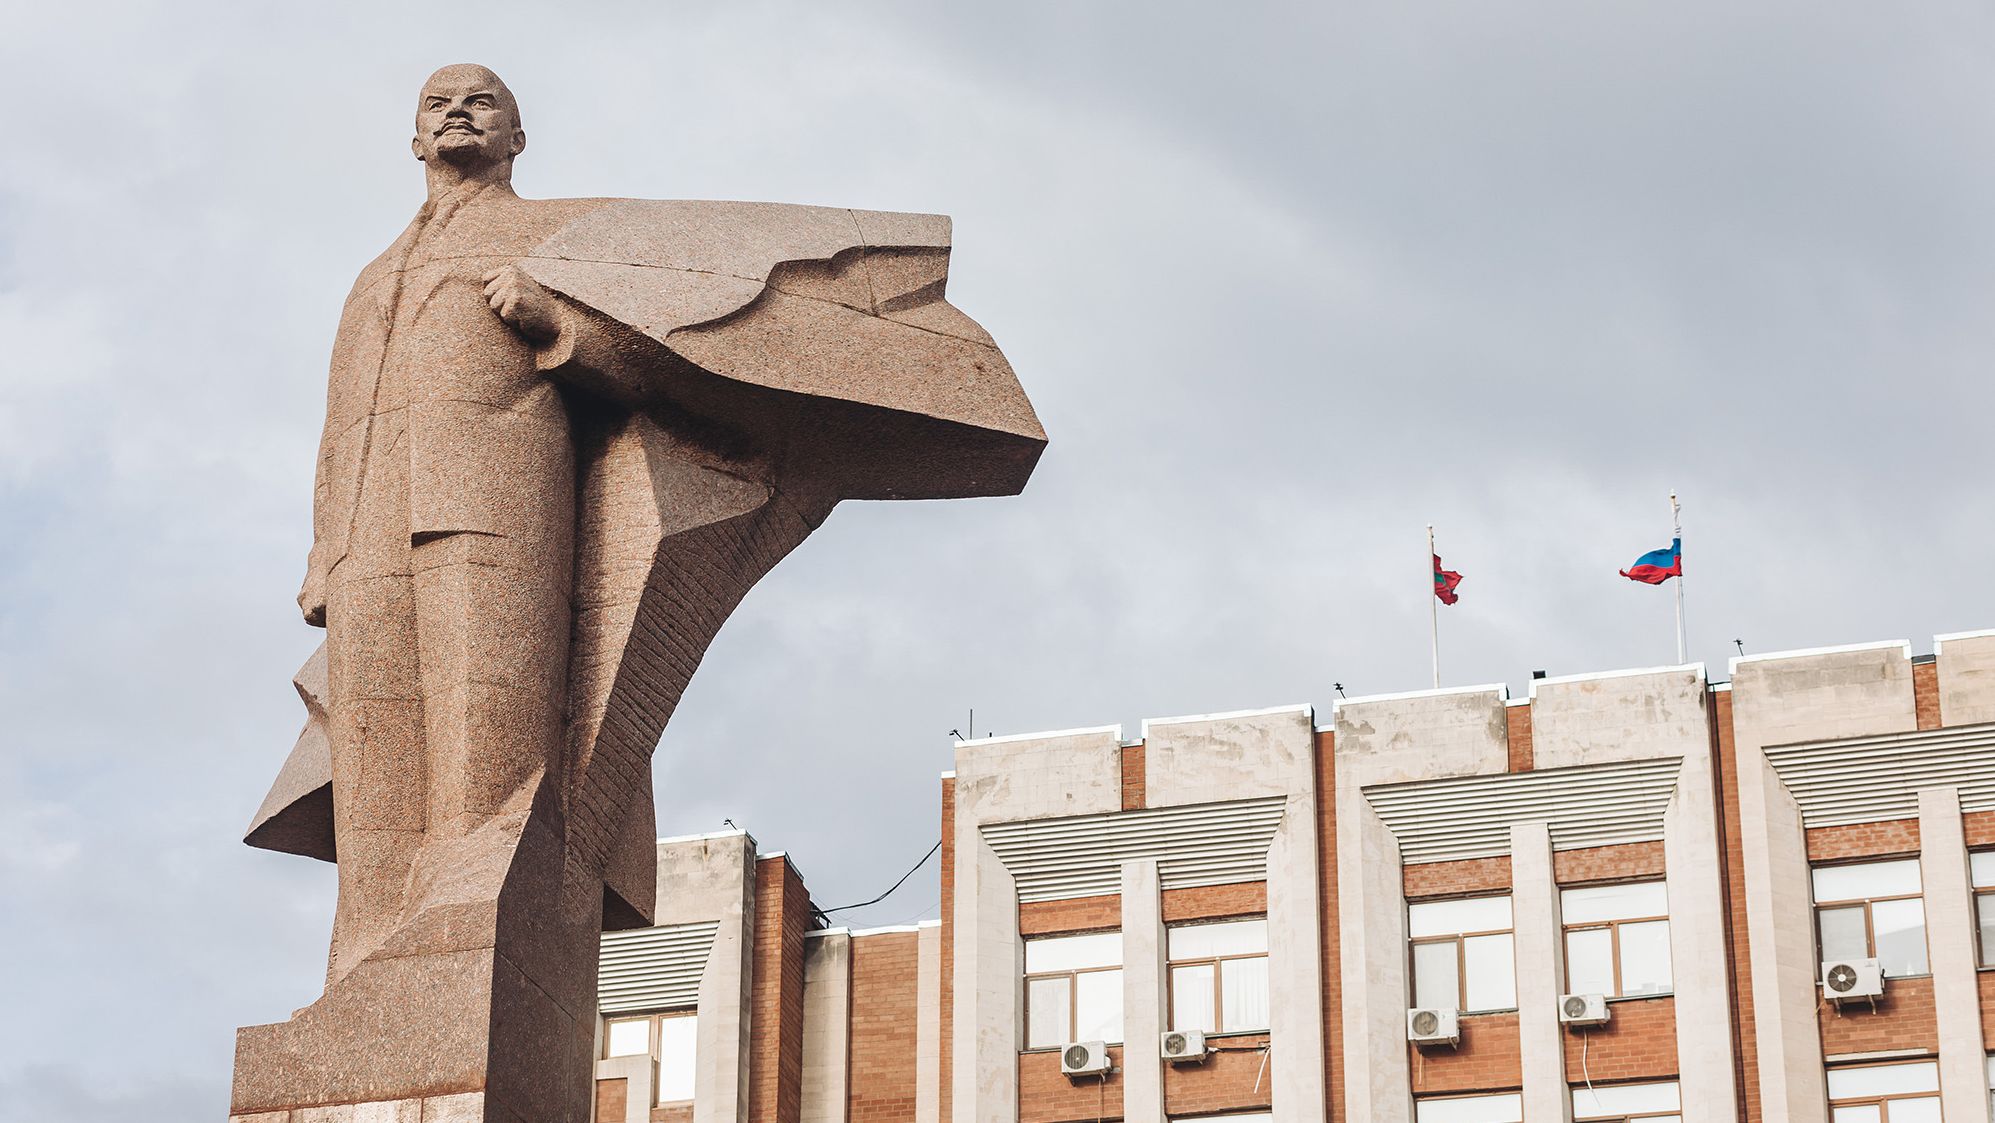 A statue of Vladimir Lenin in front of the Presidential Palace in Tiraspol.